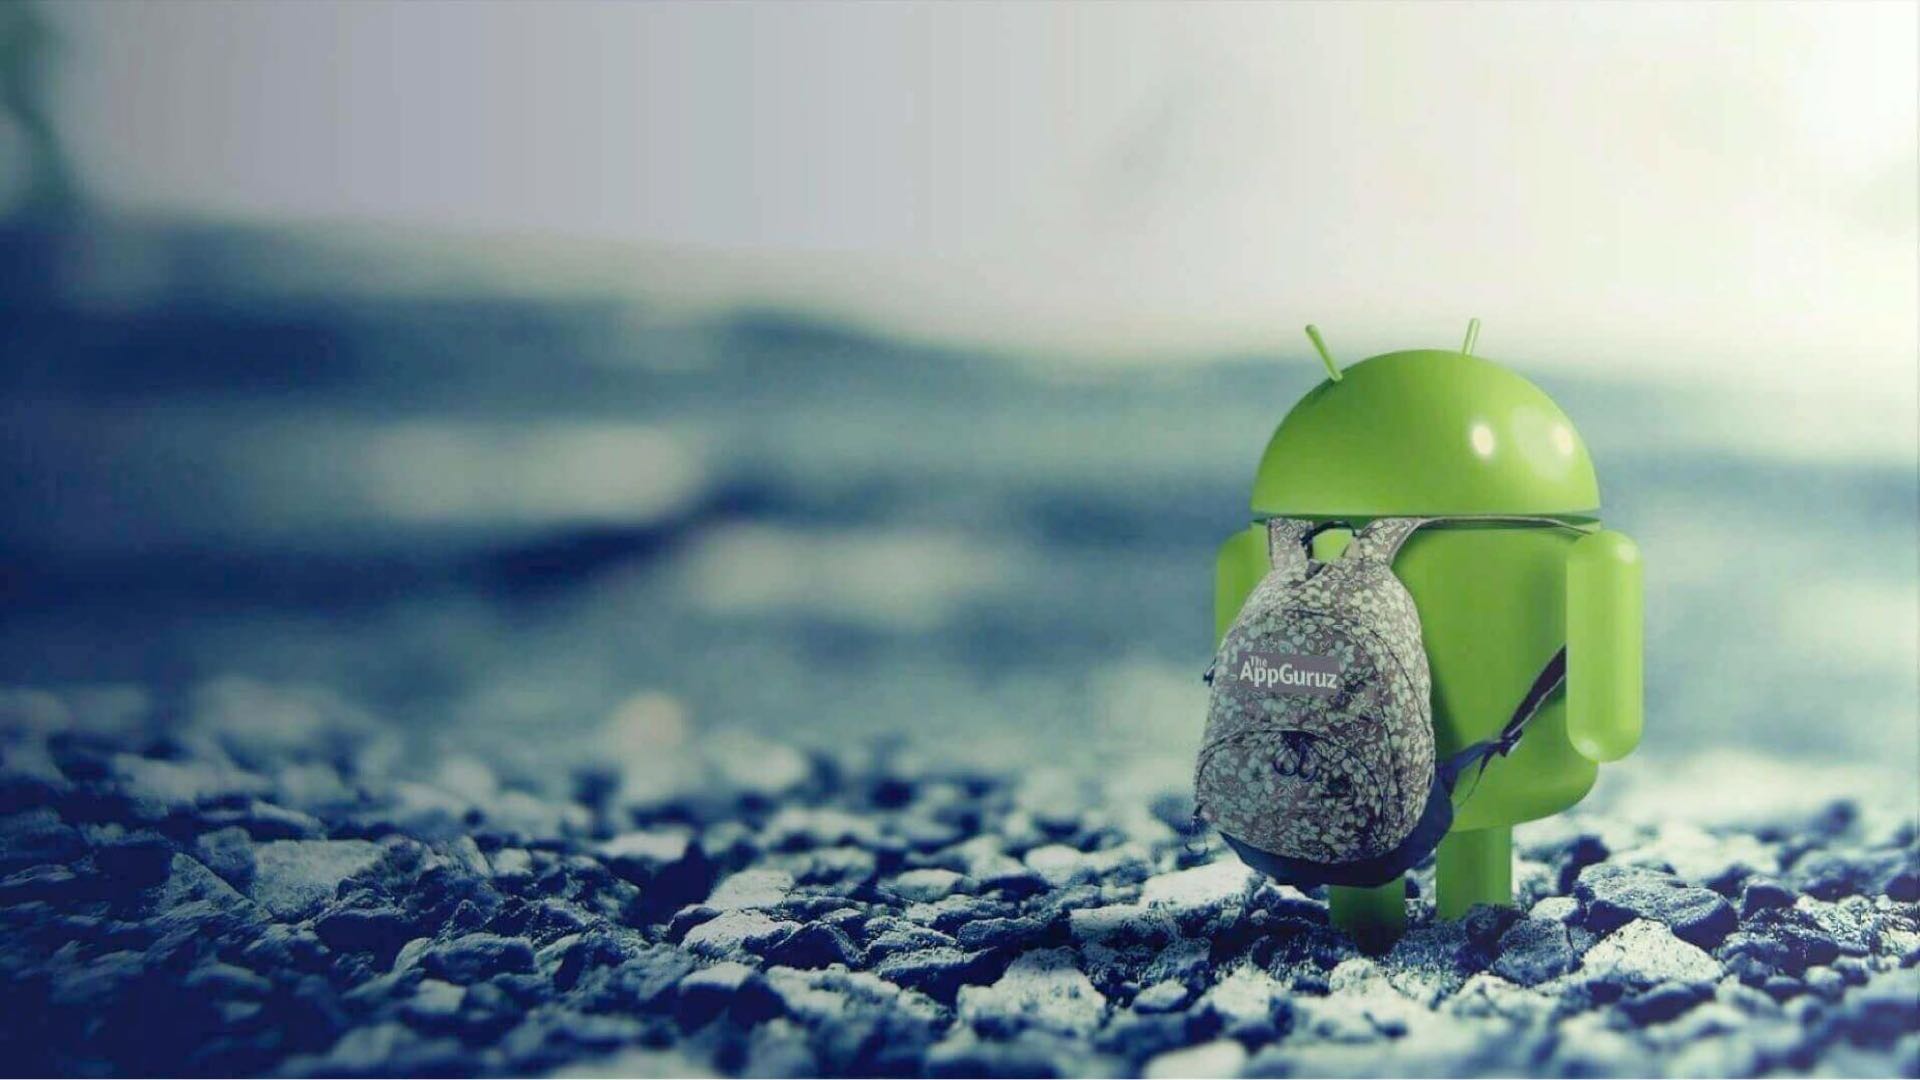 Free download Android App Development Company Hire Android Developer [1920x1080] for your Desktop, Mobile & Tablet. Explore Develop Wallpaper. Develop Wallpaper